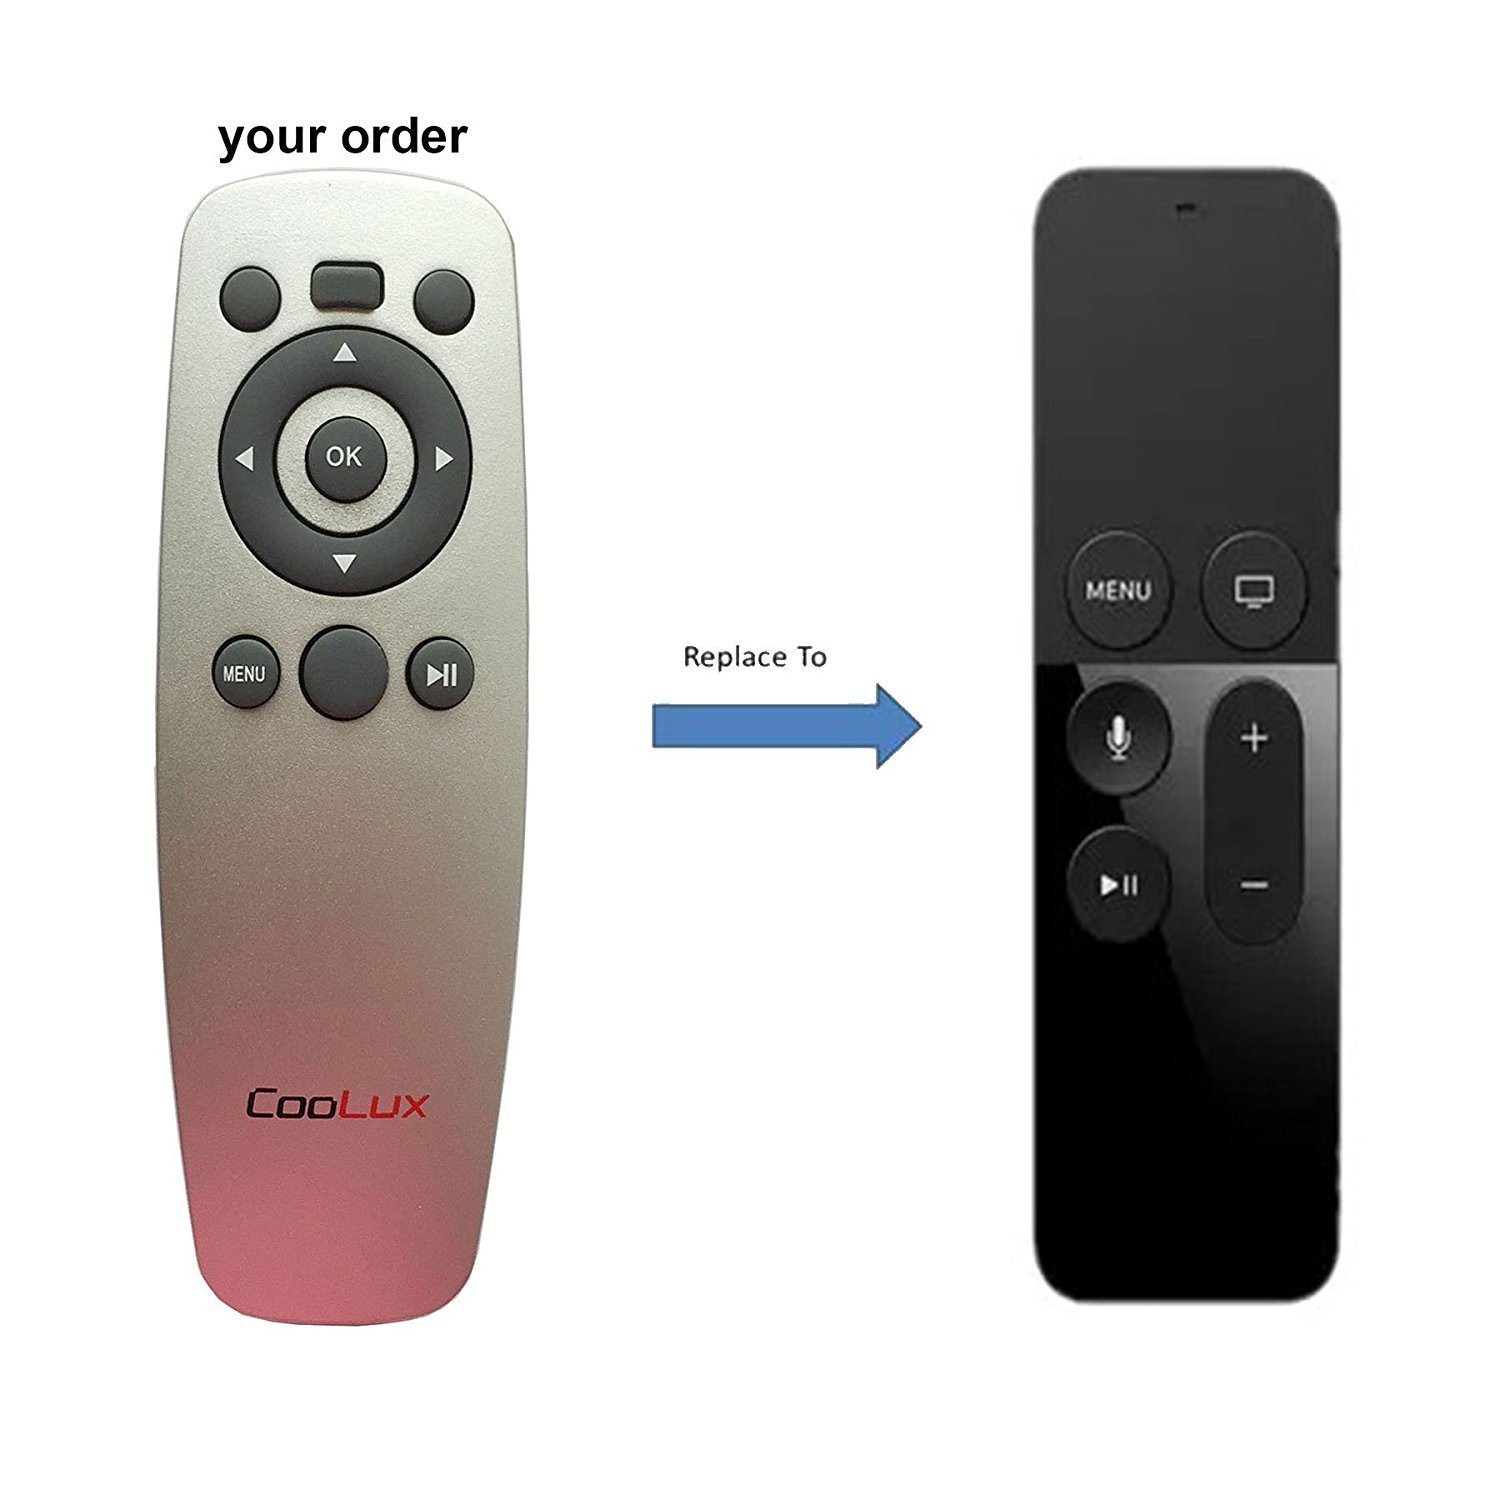 COOLUX REMOTE CONTROL OF APPLE TV MAC, IPAD, IPHONE (4th GENERATION)